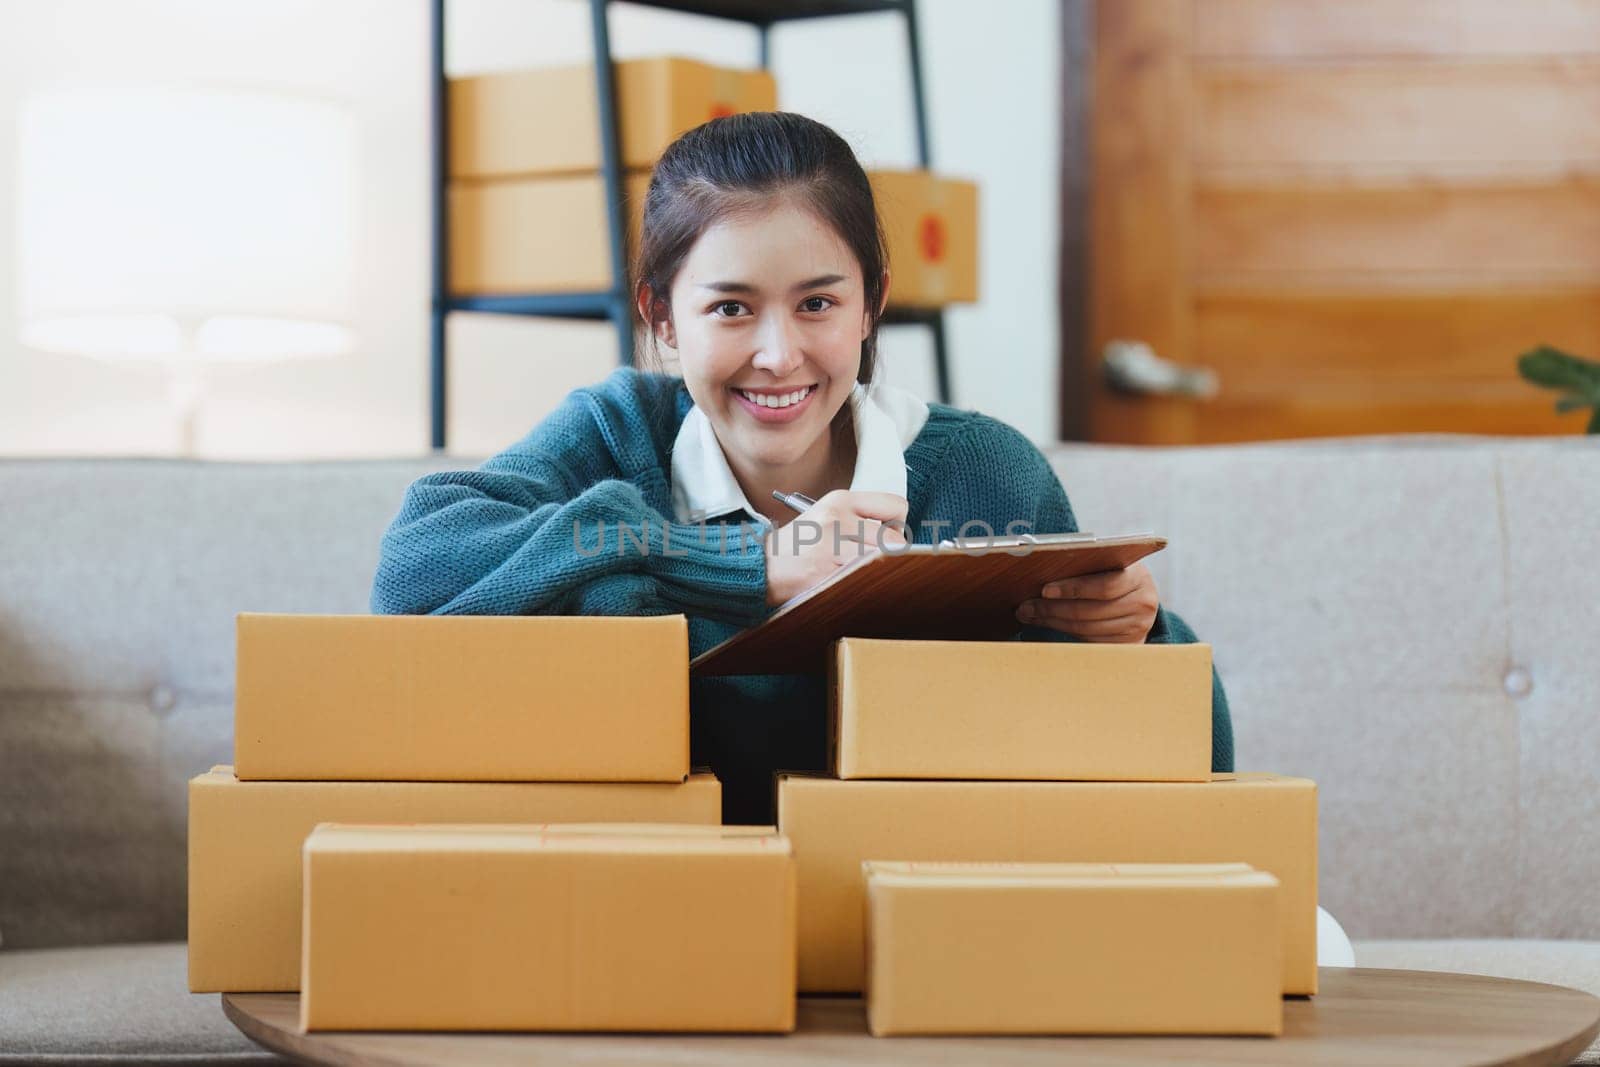 Small businesses SME owners female entrepreneurs check online orders to prepare to pack the boxes, sell to customers, sme business ideas online by itchaznong